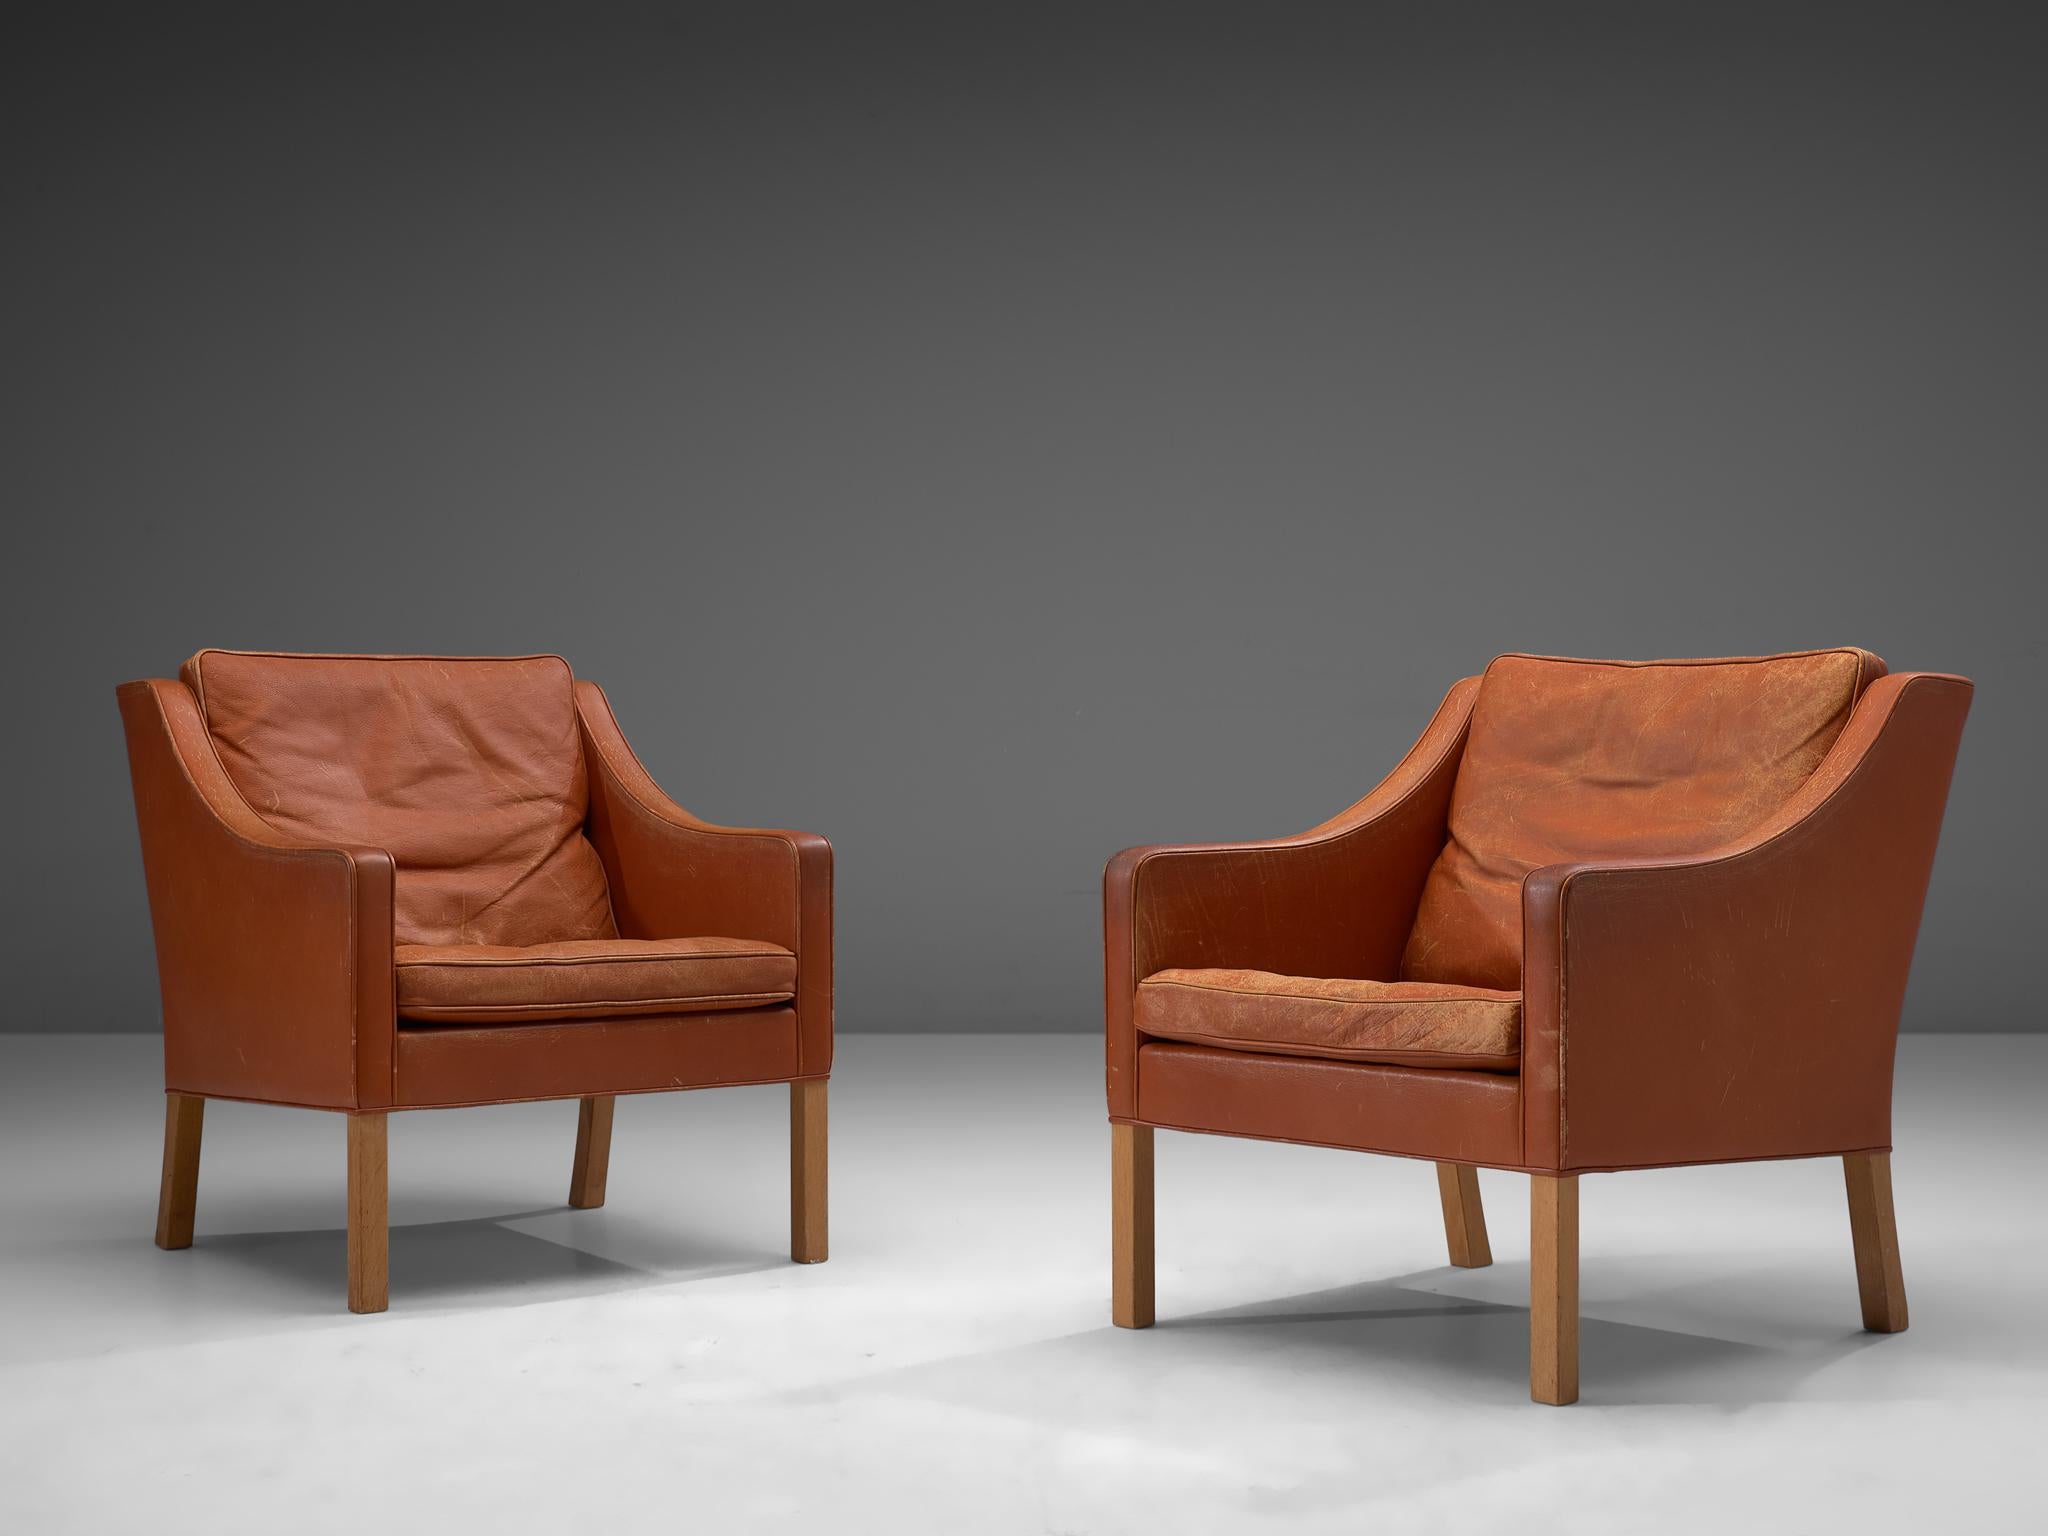 Set of 2 lounge chairs in original leather and oak, by Børge Mogensen for Fredericia Møbelfabrik, Denmark

This set is quintessentially Danish. Comfortable, well made and simplistic in design yet rich in use of material and finished. The set